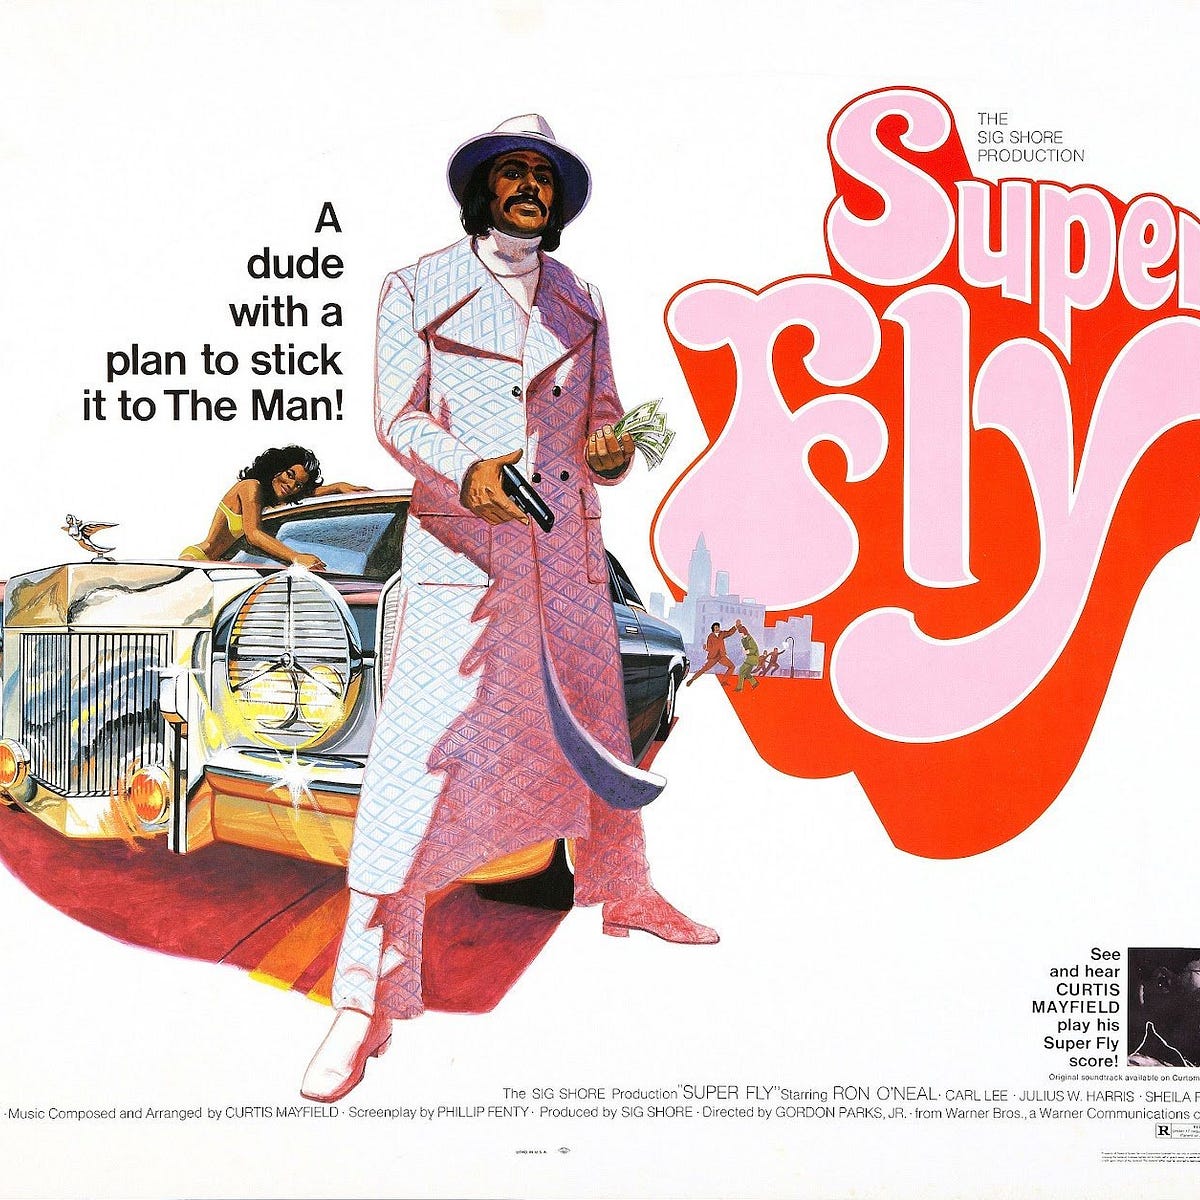 superfly on demand